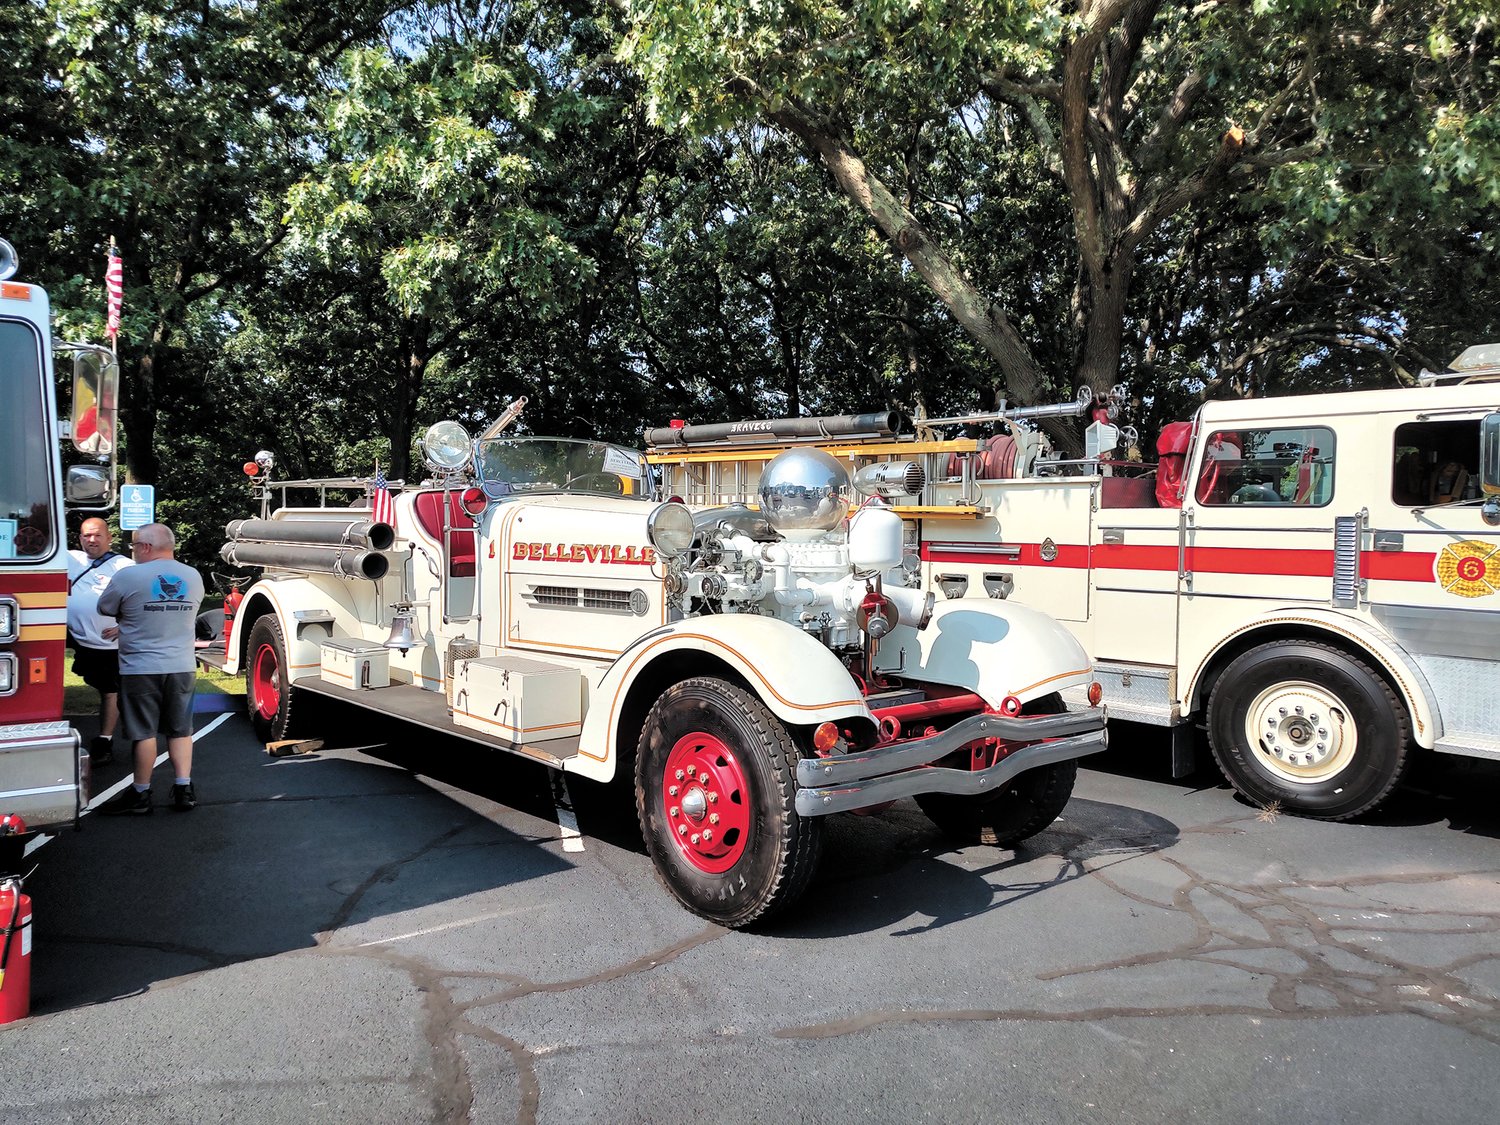 SHAPPY’S SPECIAL: Warwick resident Dick Shappy brought his 1939 Ahrens Fox fire truck that once served the Belleville NJ area to Sunday’s show’s 18th annual Antique Fire Truck Show.